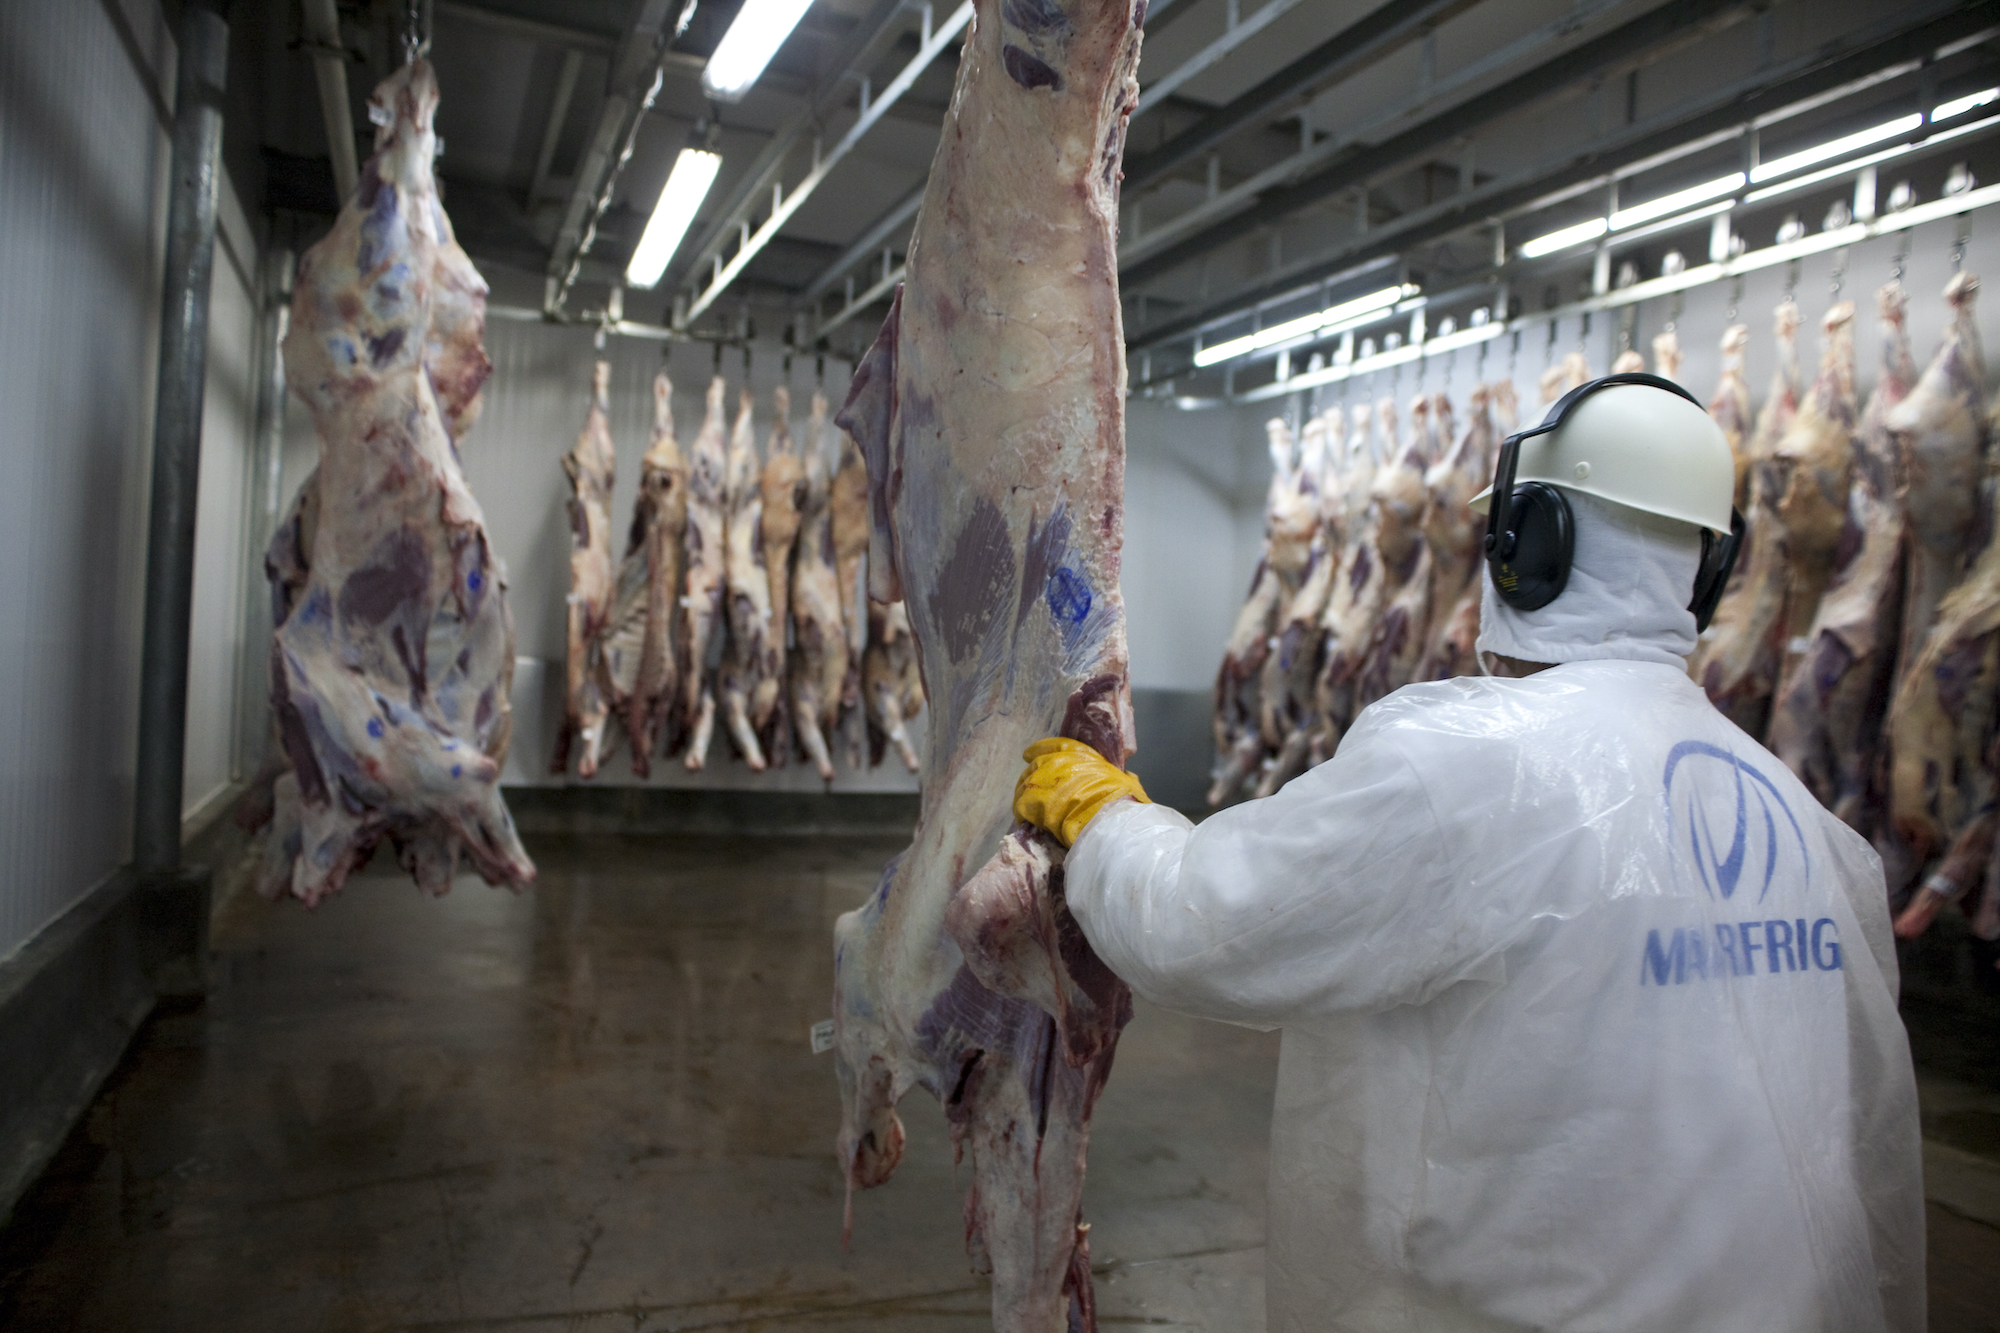 A worker butchers livestock in Marfrig slaughterhouse facility in Brazil